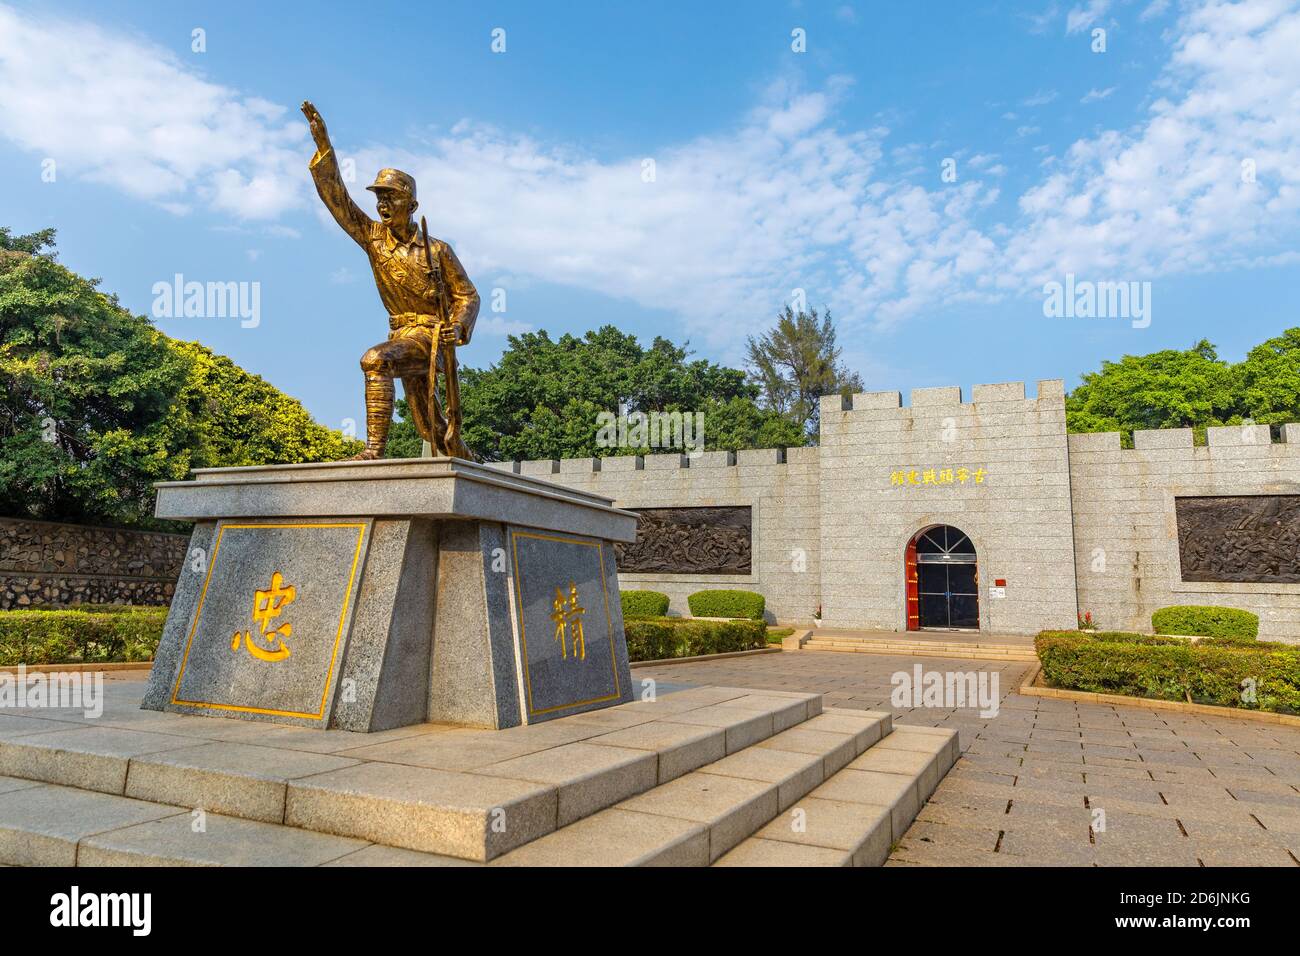 Kinmen, Taiwan - March 2, 2019: Guningtou Battle Museum, built in 1984 by local military and civilian population to commemorate the Battle of Guningto Stock Photo